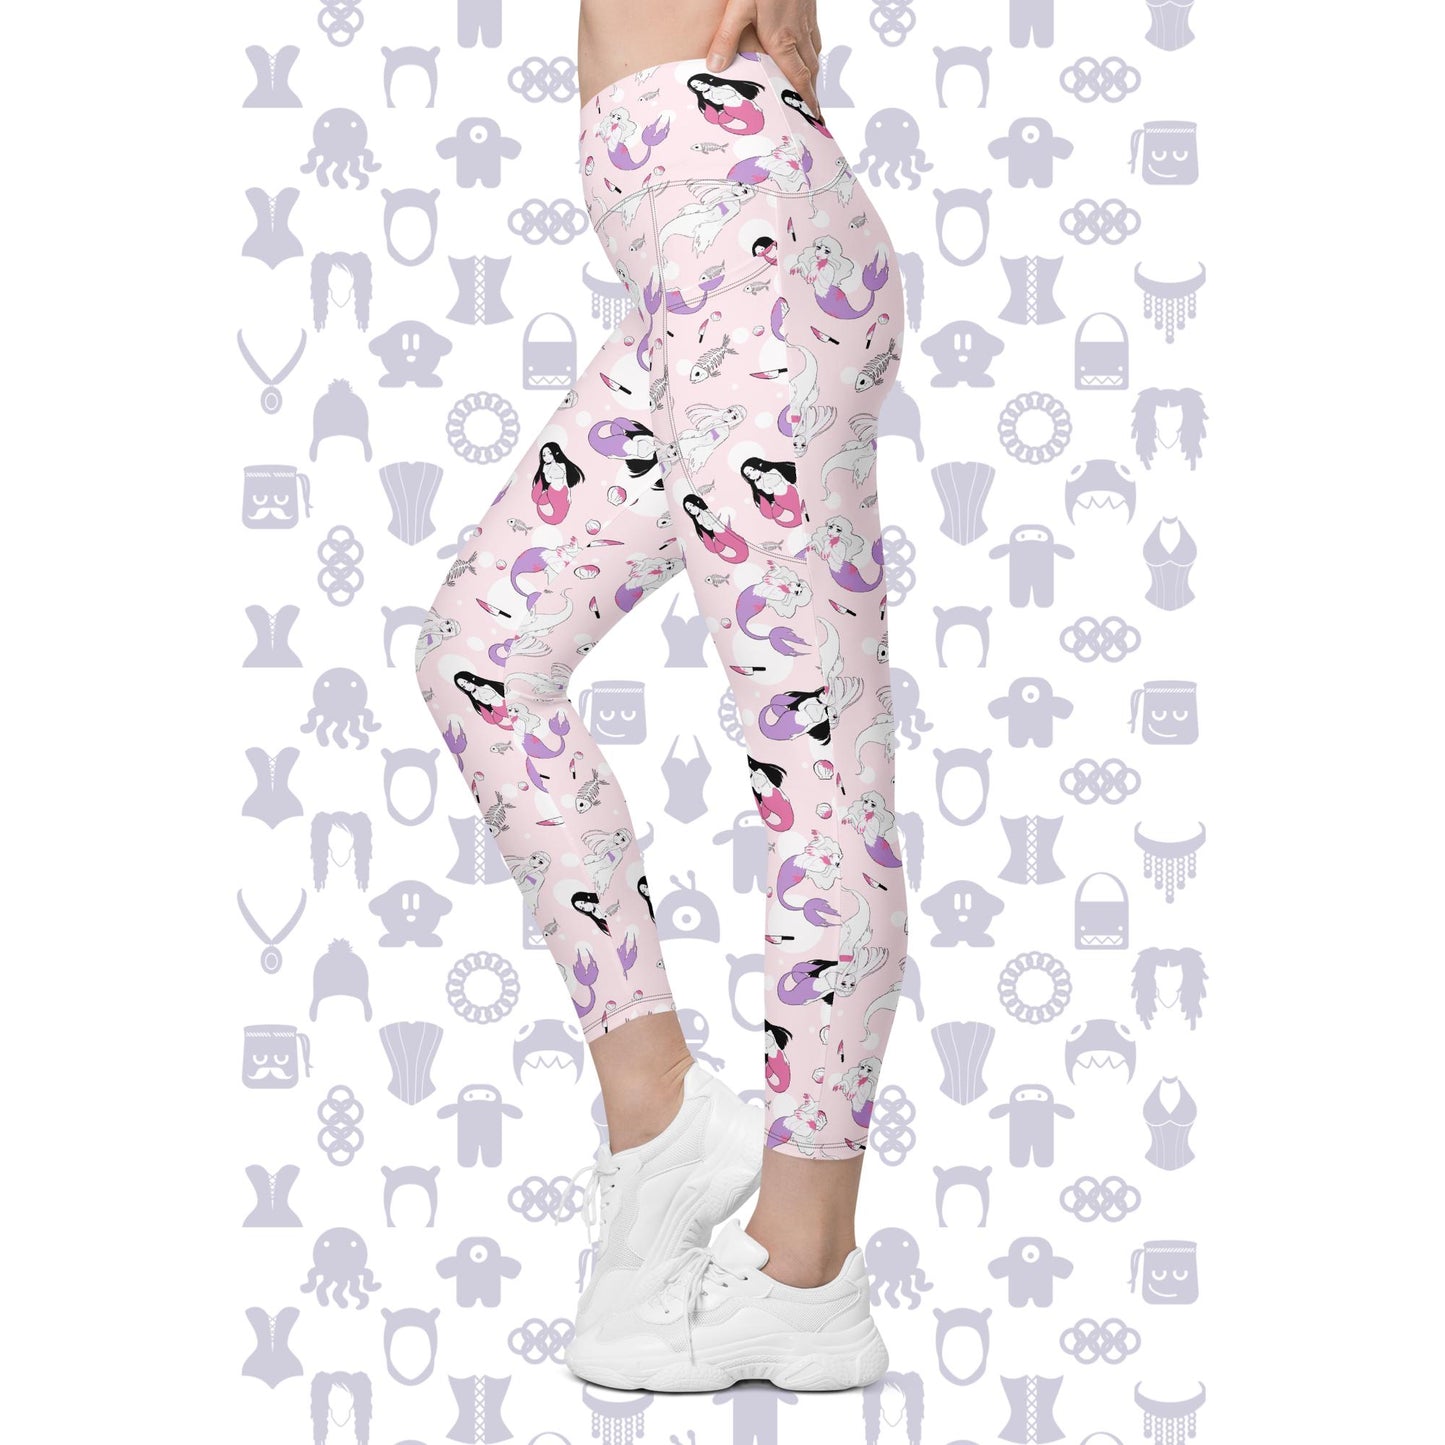 Spooky Mermaid Crossover Leggings With Pockets